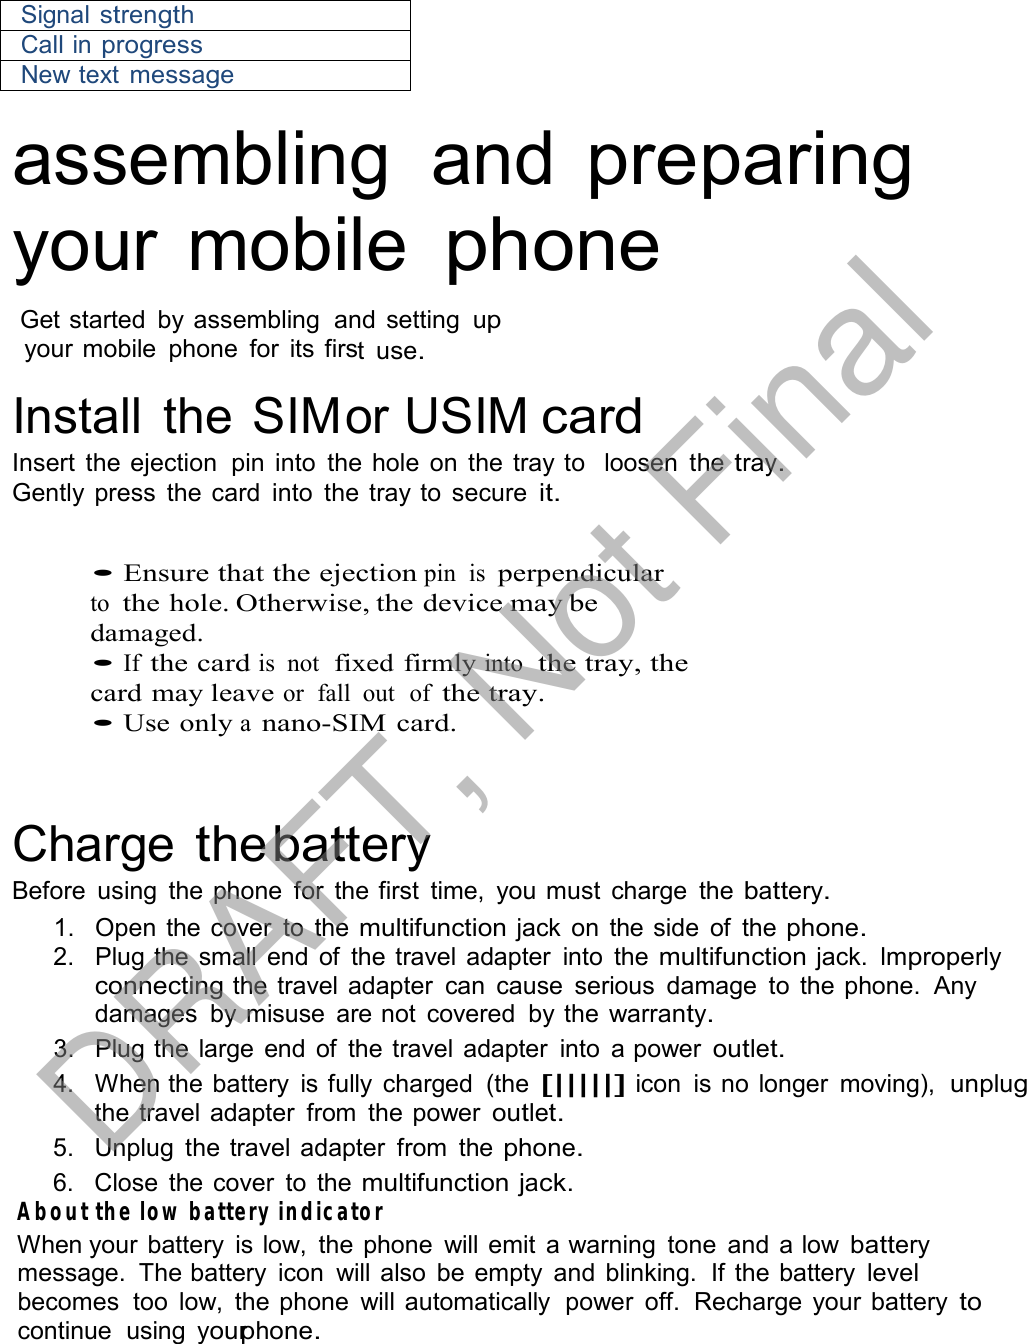  Signal strength Call in progress New text message  assembling  and preparing your mobile phone  Get started  by assembling  and setting up your mobile  phone  for  its first use.  Install  the SIMor USIM card Insert the ejection  pin into the hole  on the tray to   loosen  the tray. Gently press  the card  into  the tray to  secure it.   • Ensure that the ejection pin  is perpendicular to  the hole. Otherwise, the device may be damaged. • If the card is  not  fixed firmly into  the tray, the card may leave or  fall  out  of the tray. • Use only a nano-SIM card.     Charge the battery Before  using  the phone  for  the first  time,  you must  charge  the battery. 1.   Open the cover  to  the multifunction jack  on  the side  of  the phone. 2.   Plug the small end of  the travel adapter  into  the multifunction jack. Improperly connecting the travel adapter  can  cause  serious  damage  to the phone.  Any damages  by misuse  are not  covered  by the warranty. 3.   Plug the  large  end of  the travel adapter  into  a power outlet. 4.   When the battery  is fully  charged  (the [|||||] icon  is no longer  moving),  unplug the travel adapter  from  the power outlet. 5.   Unplug  the travel adapter  from  the phone. 6.   Close the cover  to the multifunction jack. About the low battery indicator When your battery  is low,  the phone  will emit  a warning  tone  and a low battery message.  The battery  icon  will also  be empty  and blinking.  If the battery level becomes  too  low,  the phone  will automatically  power  off.  Recharge  your battery to continue  using  yourphone. DRAFT, Not Final